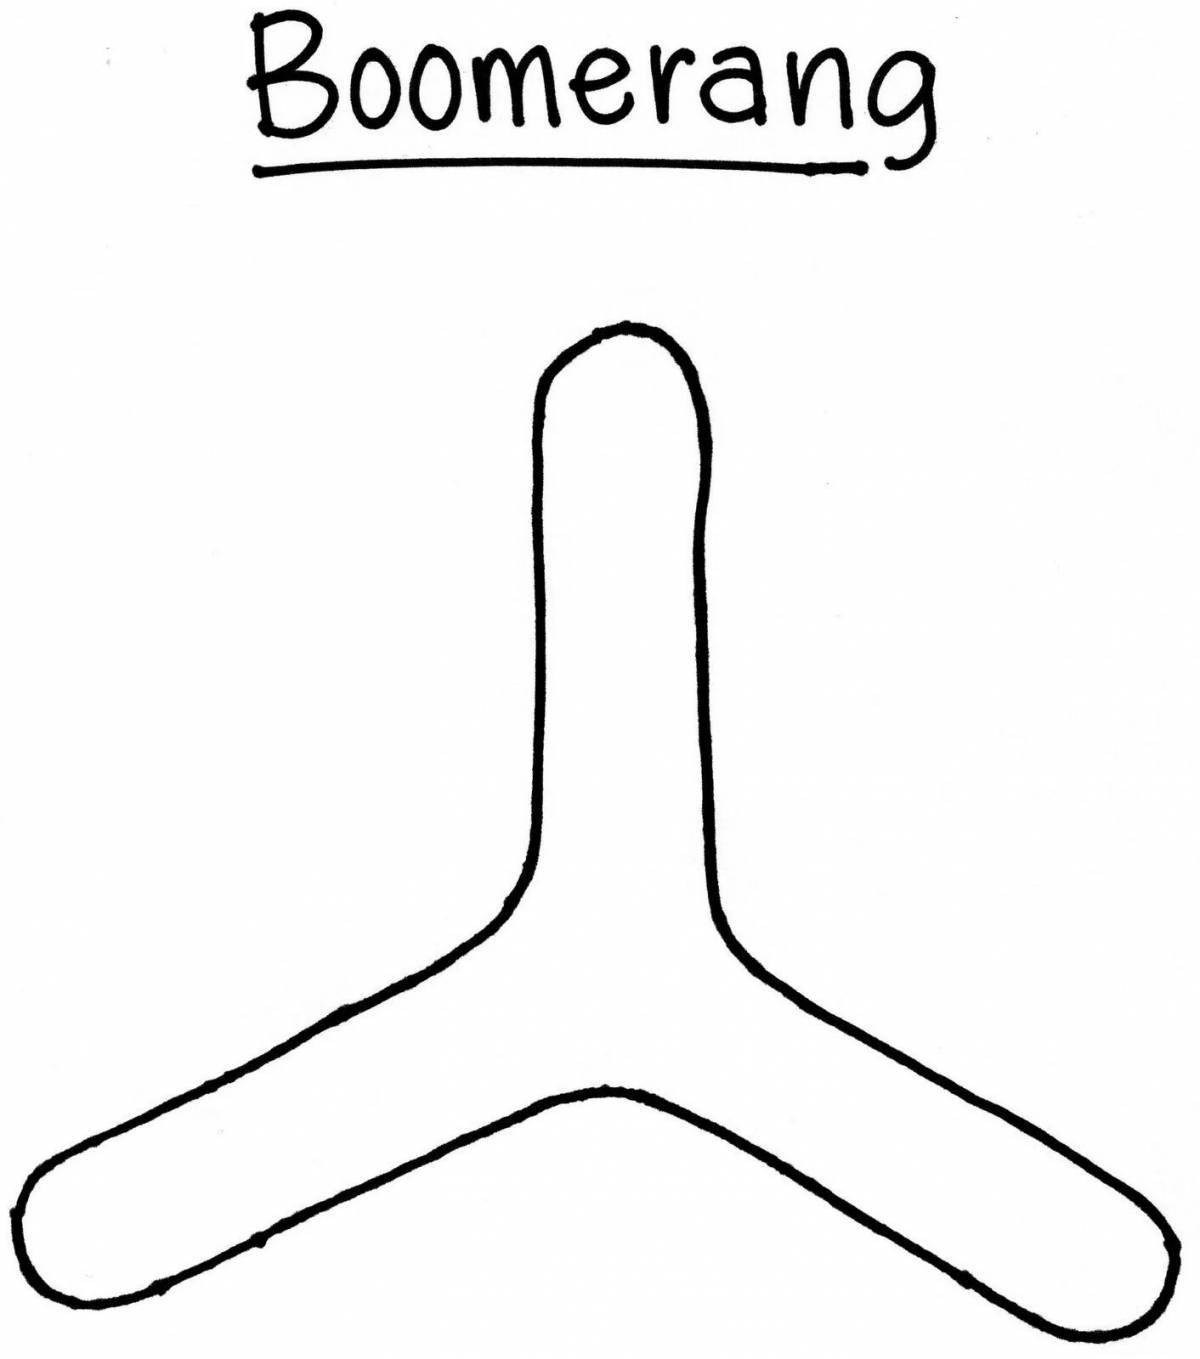 Fancy boomerang coloring page